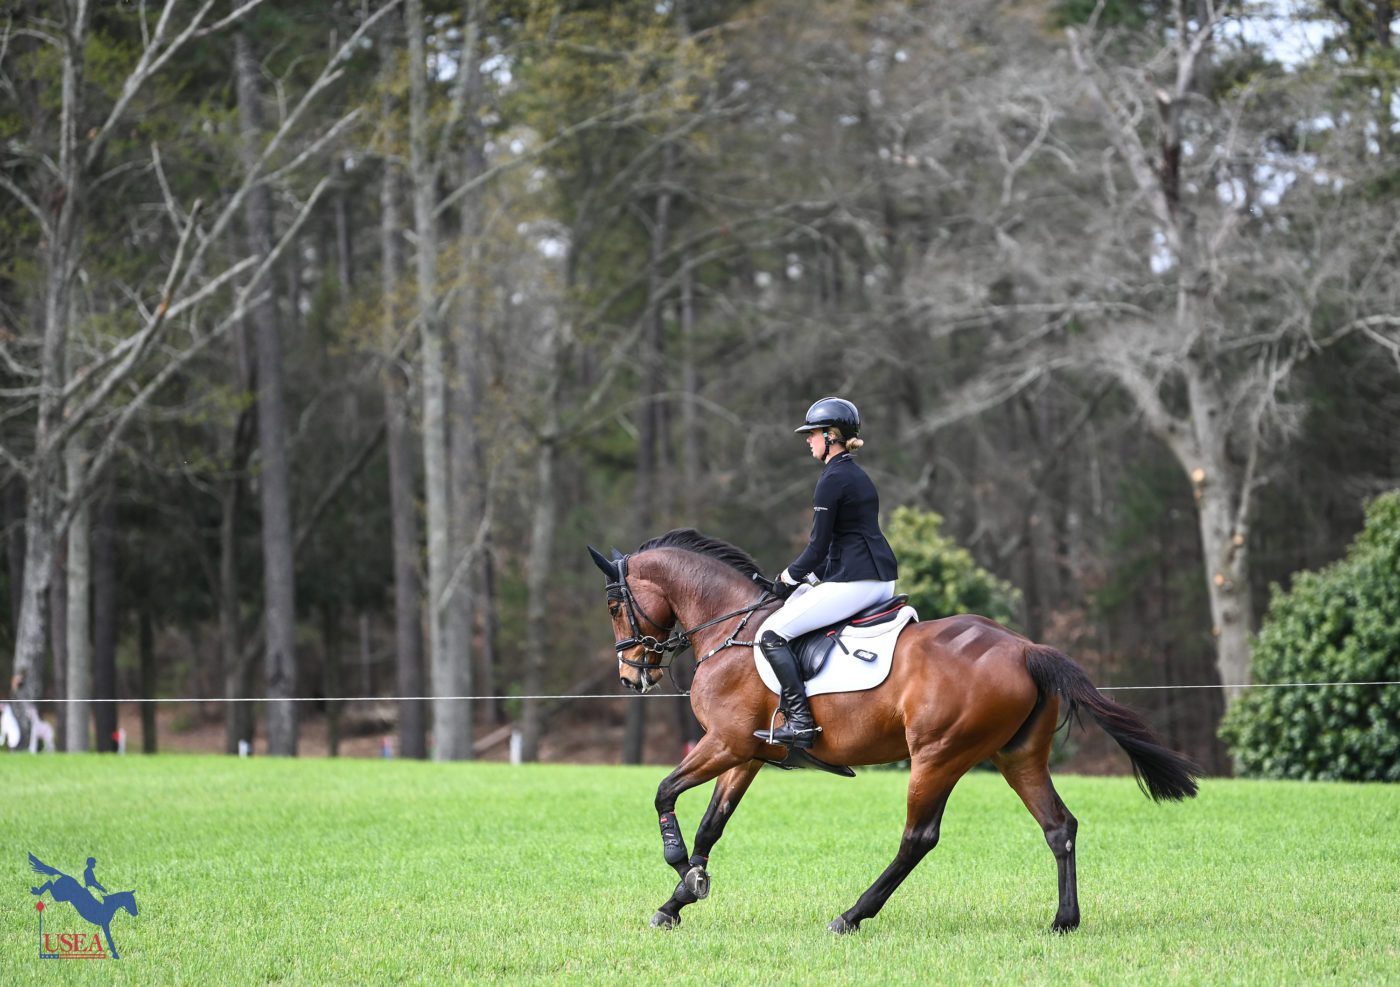 Caroline Martin warms up by the pines in the CCI3*-S. USEA/Lindsay Berreth photo